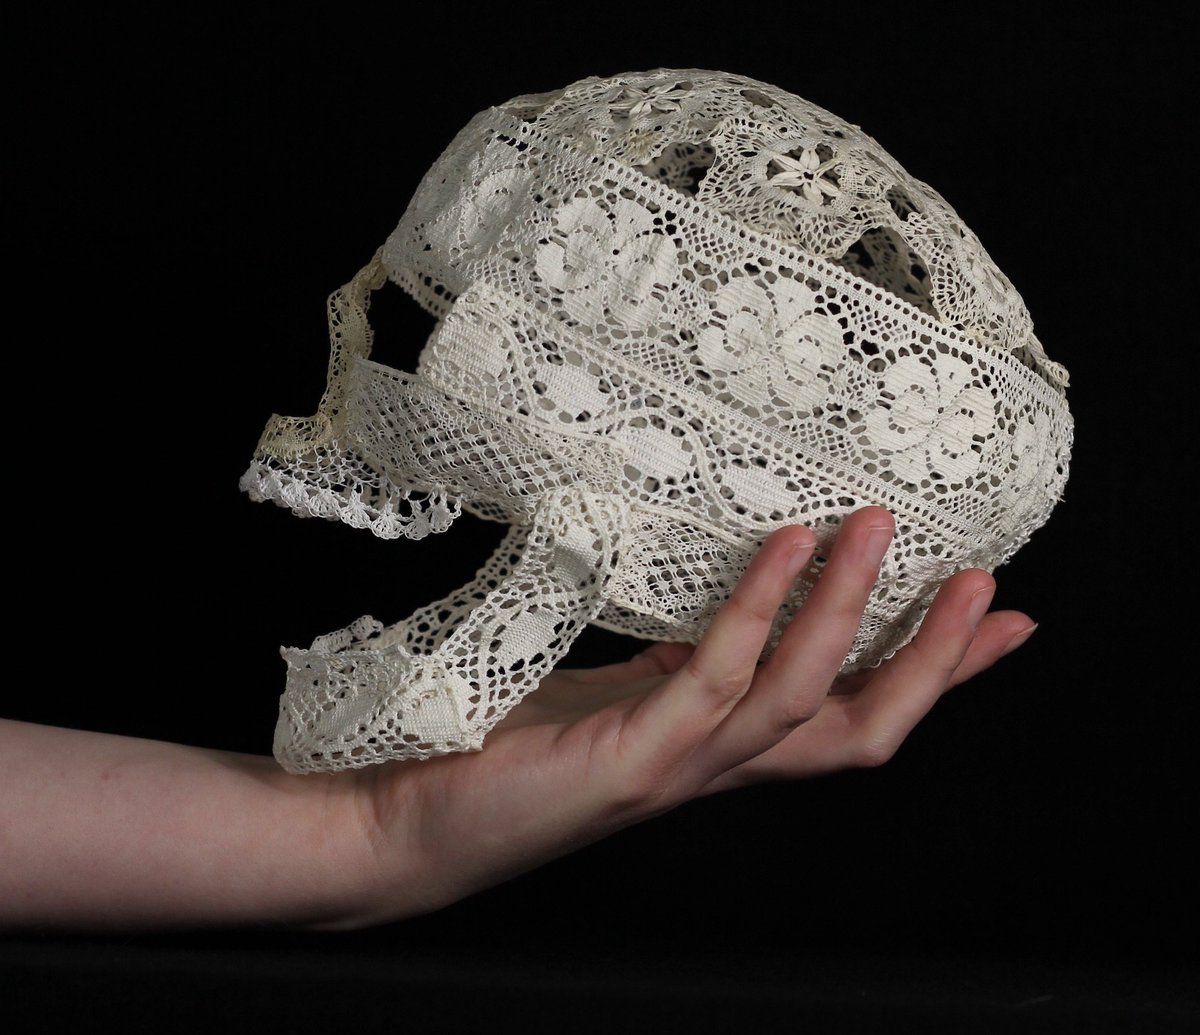 Swedish fiber and textile artist Ester Magnusson had the idea of creating a copy of a human skull made entirely from bobbin lace (via Colossal) #WomensArt #Wednesday